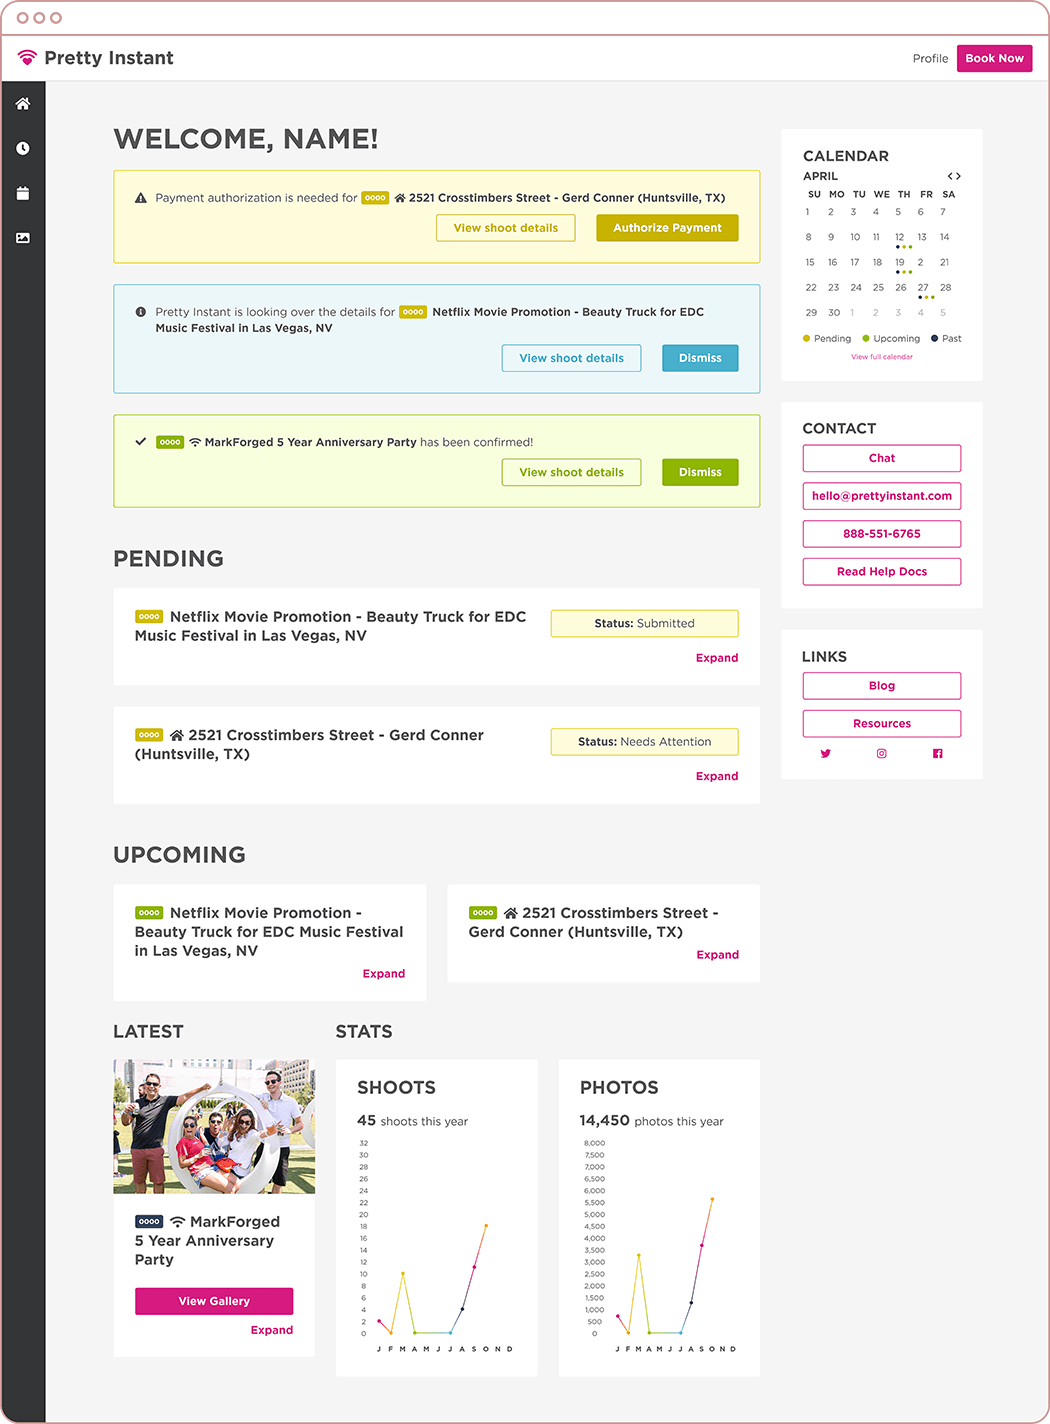 Final design of the dashboard home page